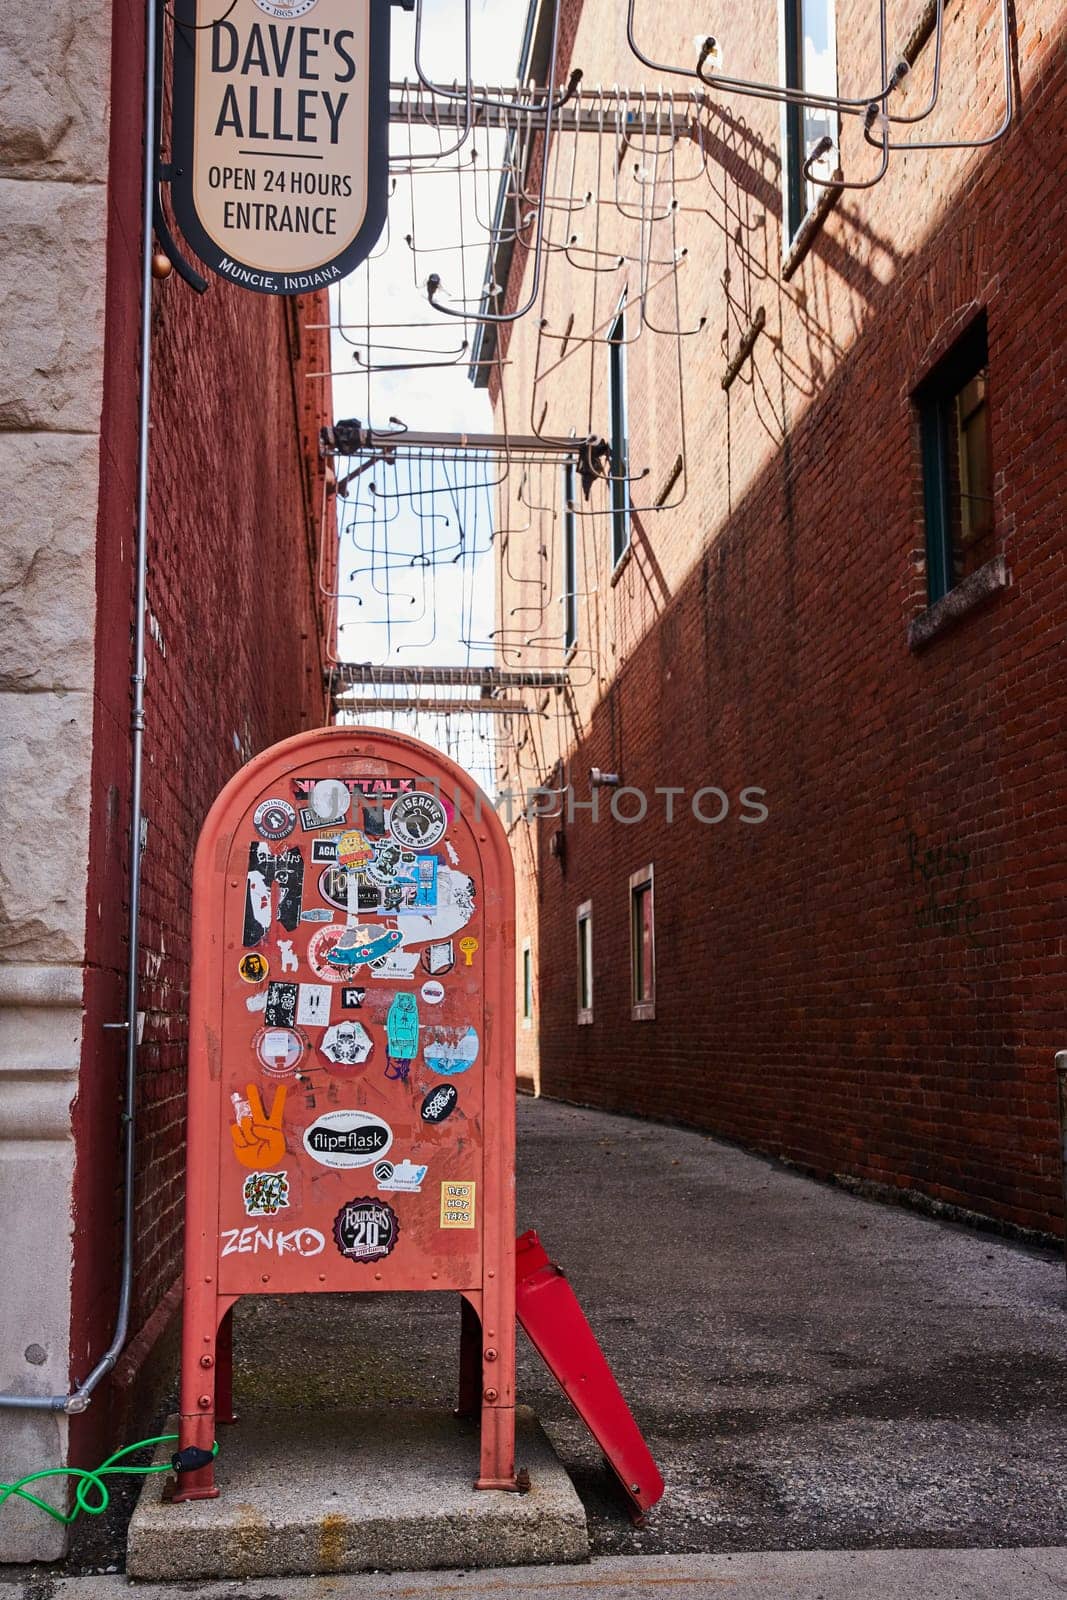 Vibrant urban scene at Dave's Alley, a 24-hour hub in downtown Muncie, Indiana, showcasing textured brick walls, colorful street art, and city life complexity, 2023